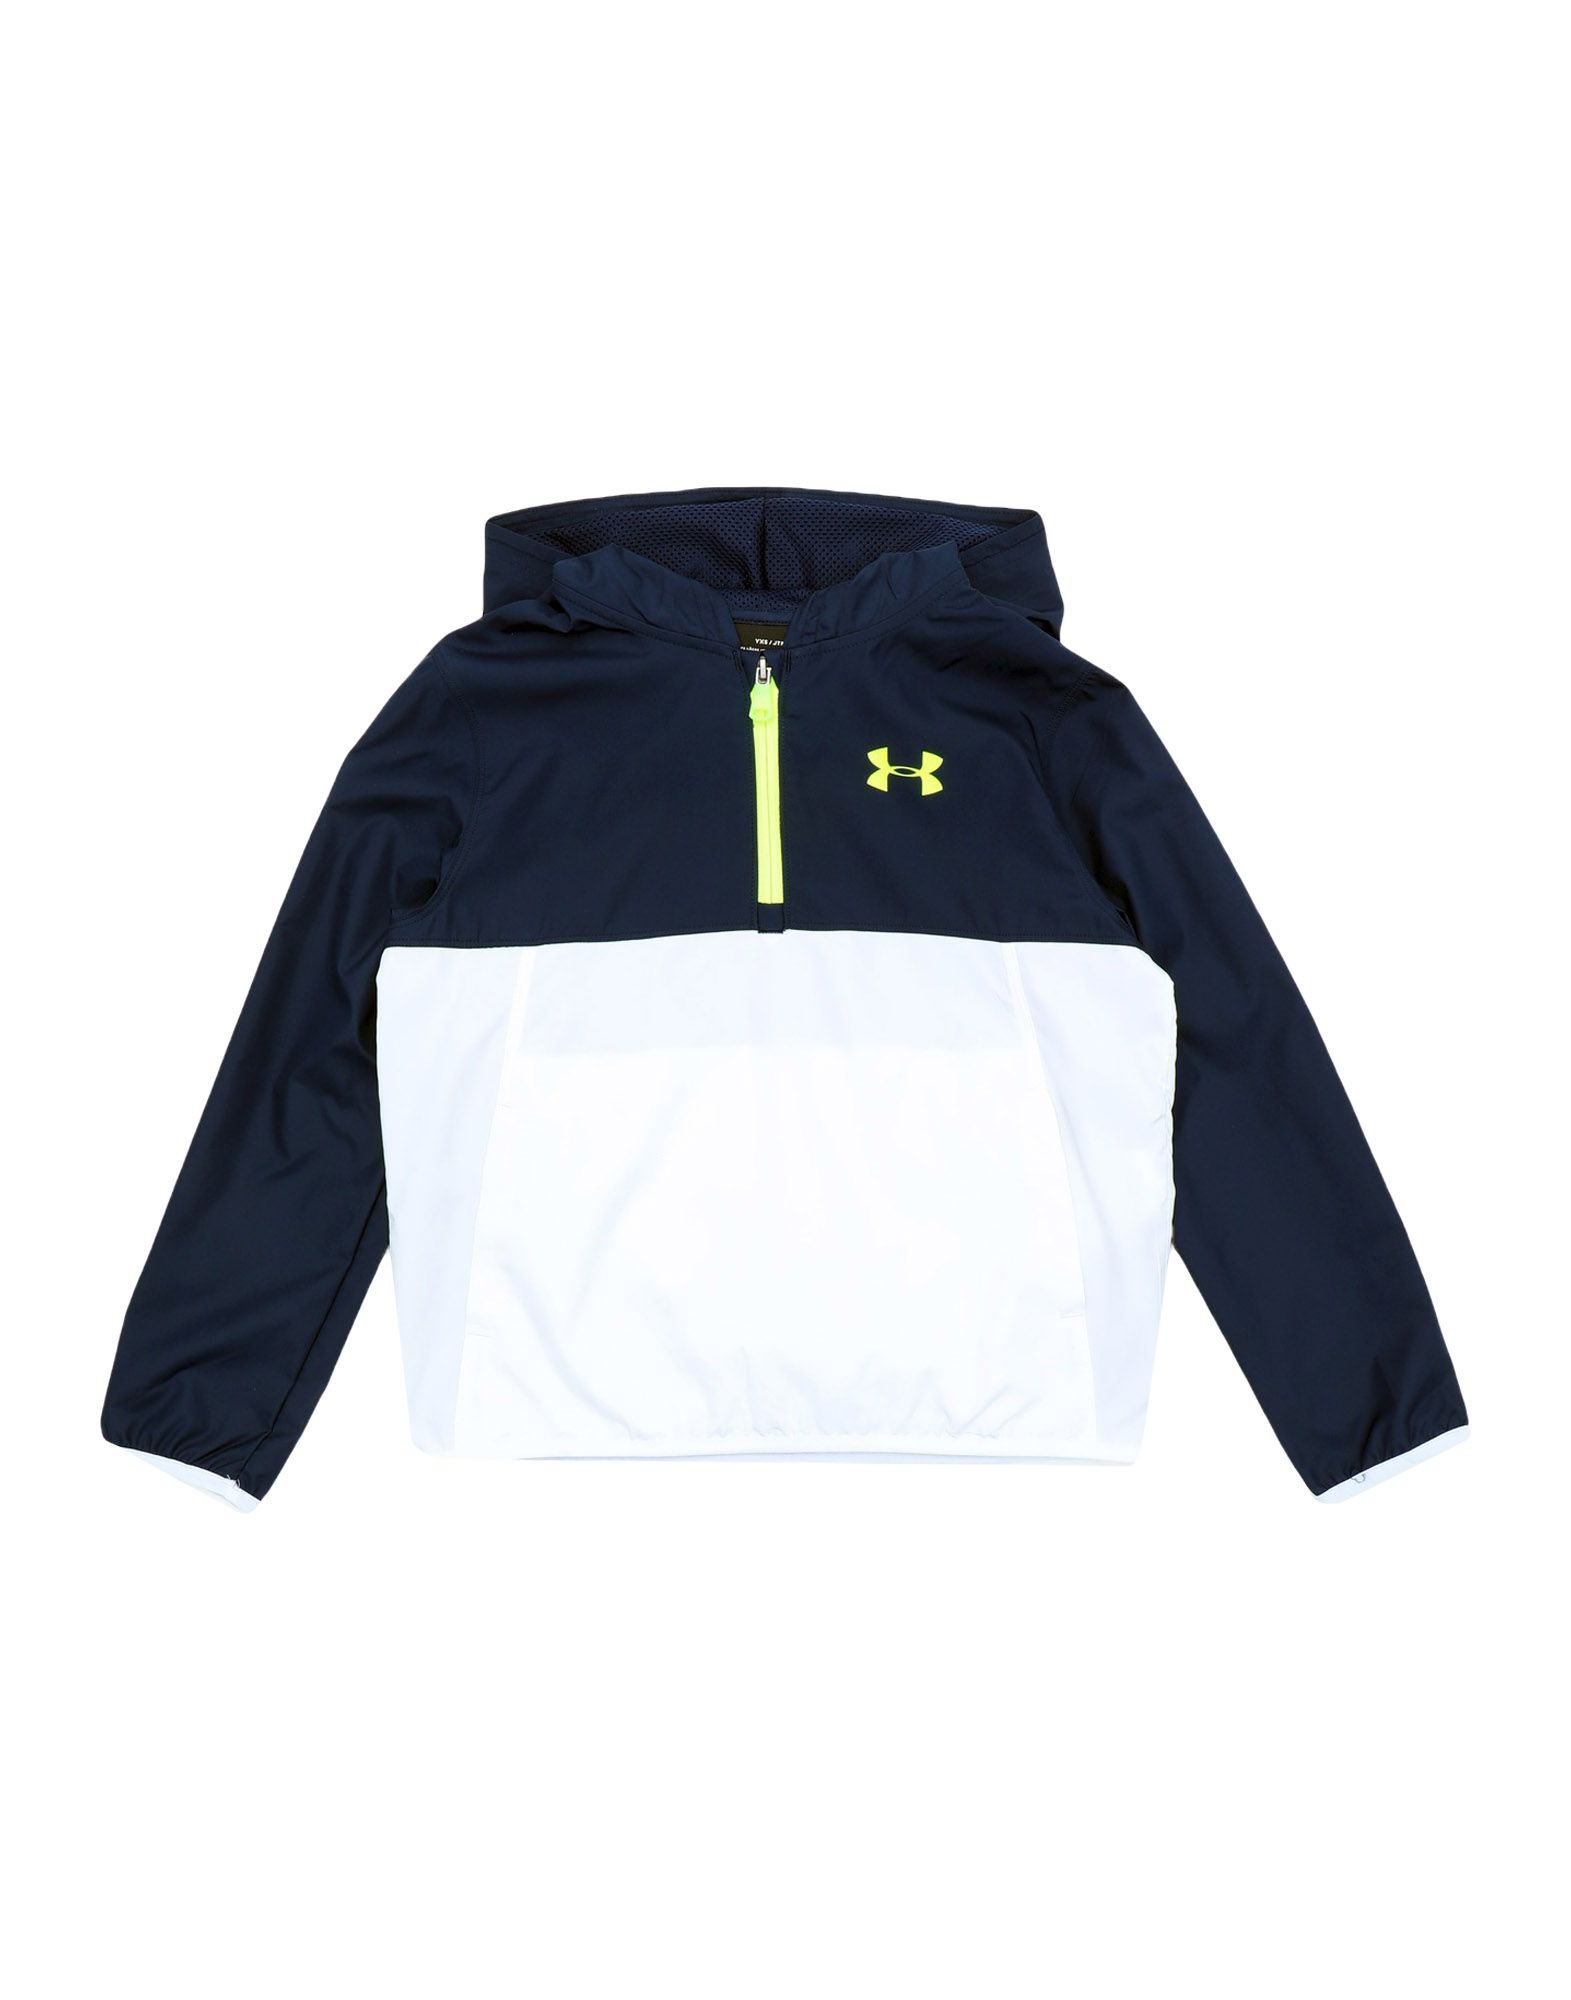 under armour jackets